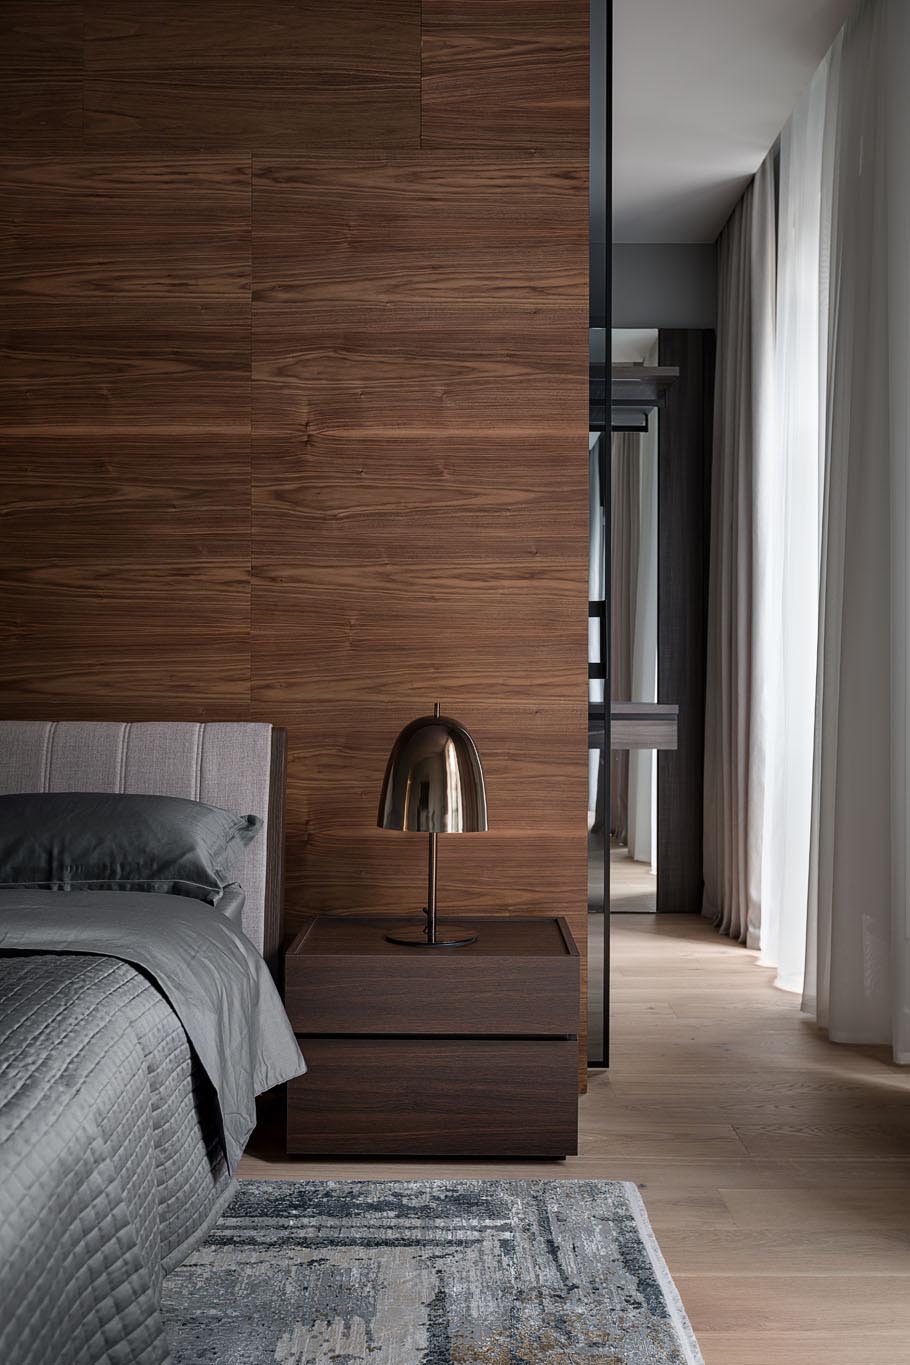 In this modern primary bedroom suite, there's a wood accent wall that separates the bedroom from the walk-through closet, that also includes black glass doors.